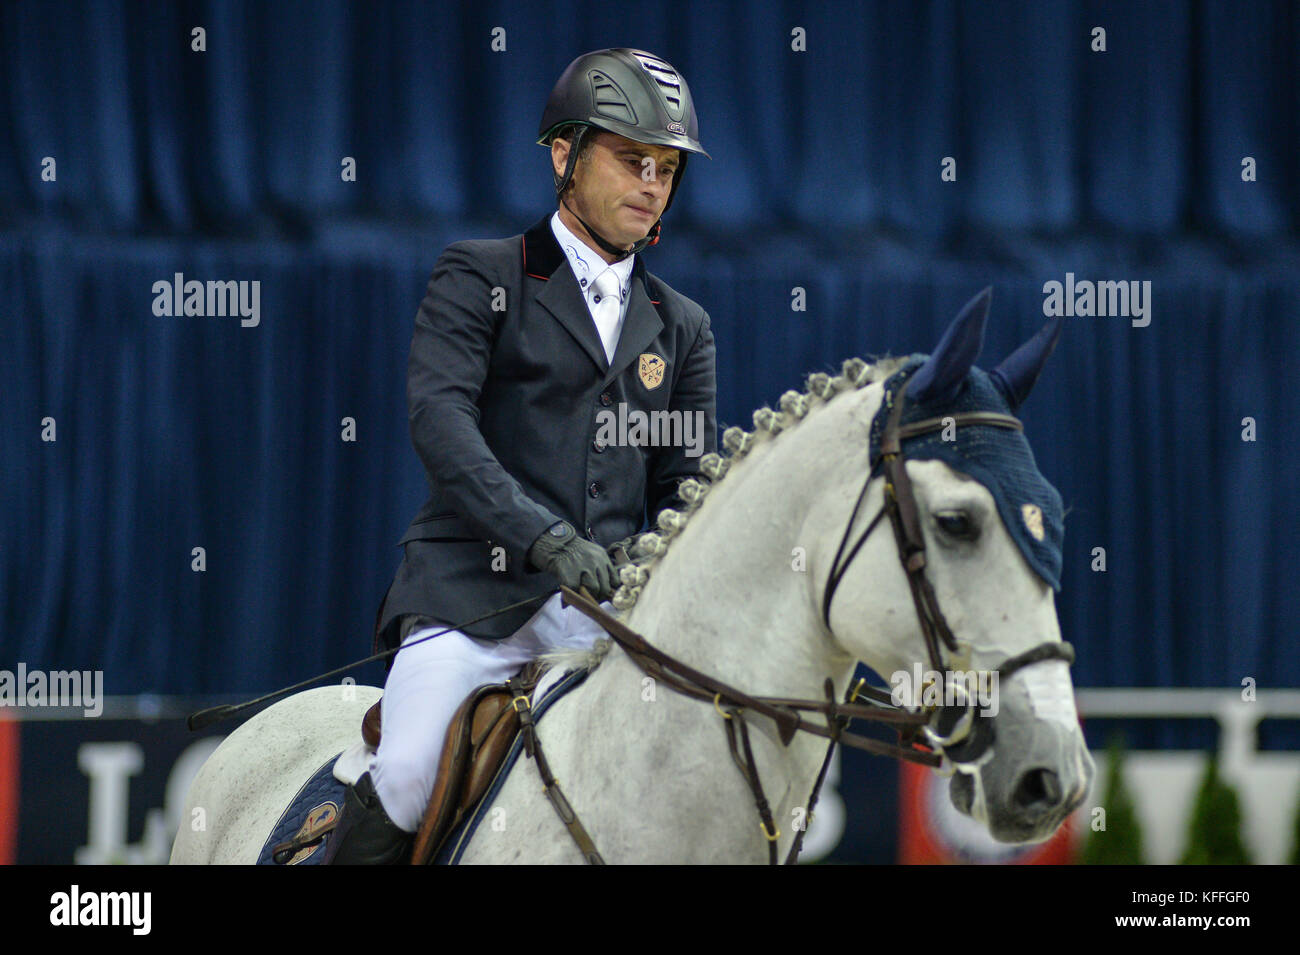 Washington, DC, USA. 27th Oct, 2017. DENIS LYNCH, riding RMF BELLA BALOUBET, surveys the course before his run in the International Jumper Speed Final held at the Capital One Arena in Washington, DC. Credit: Amy Sanderson/ZUMA Wire/Alamy Live News Stock Photo